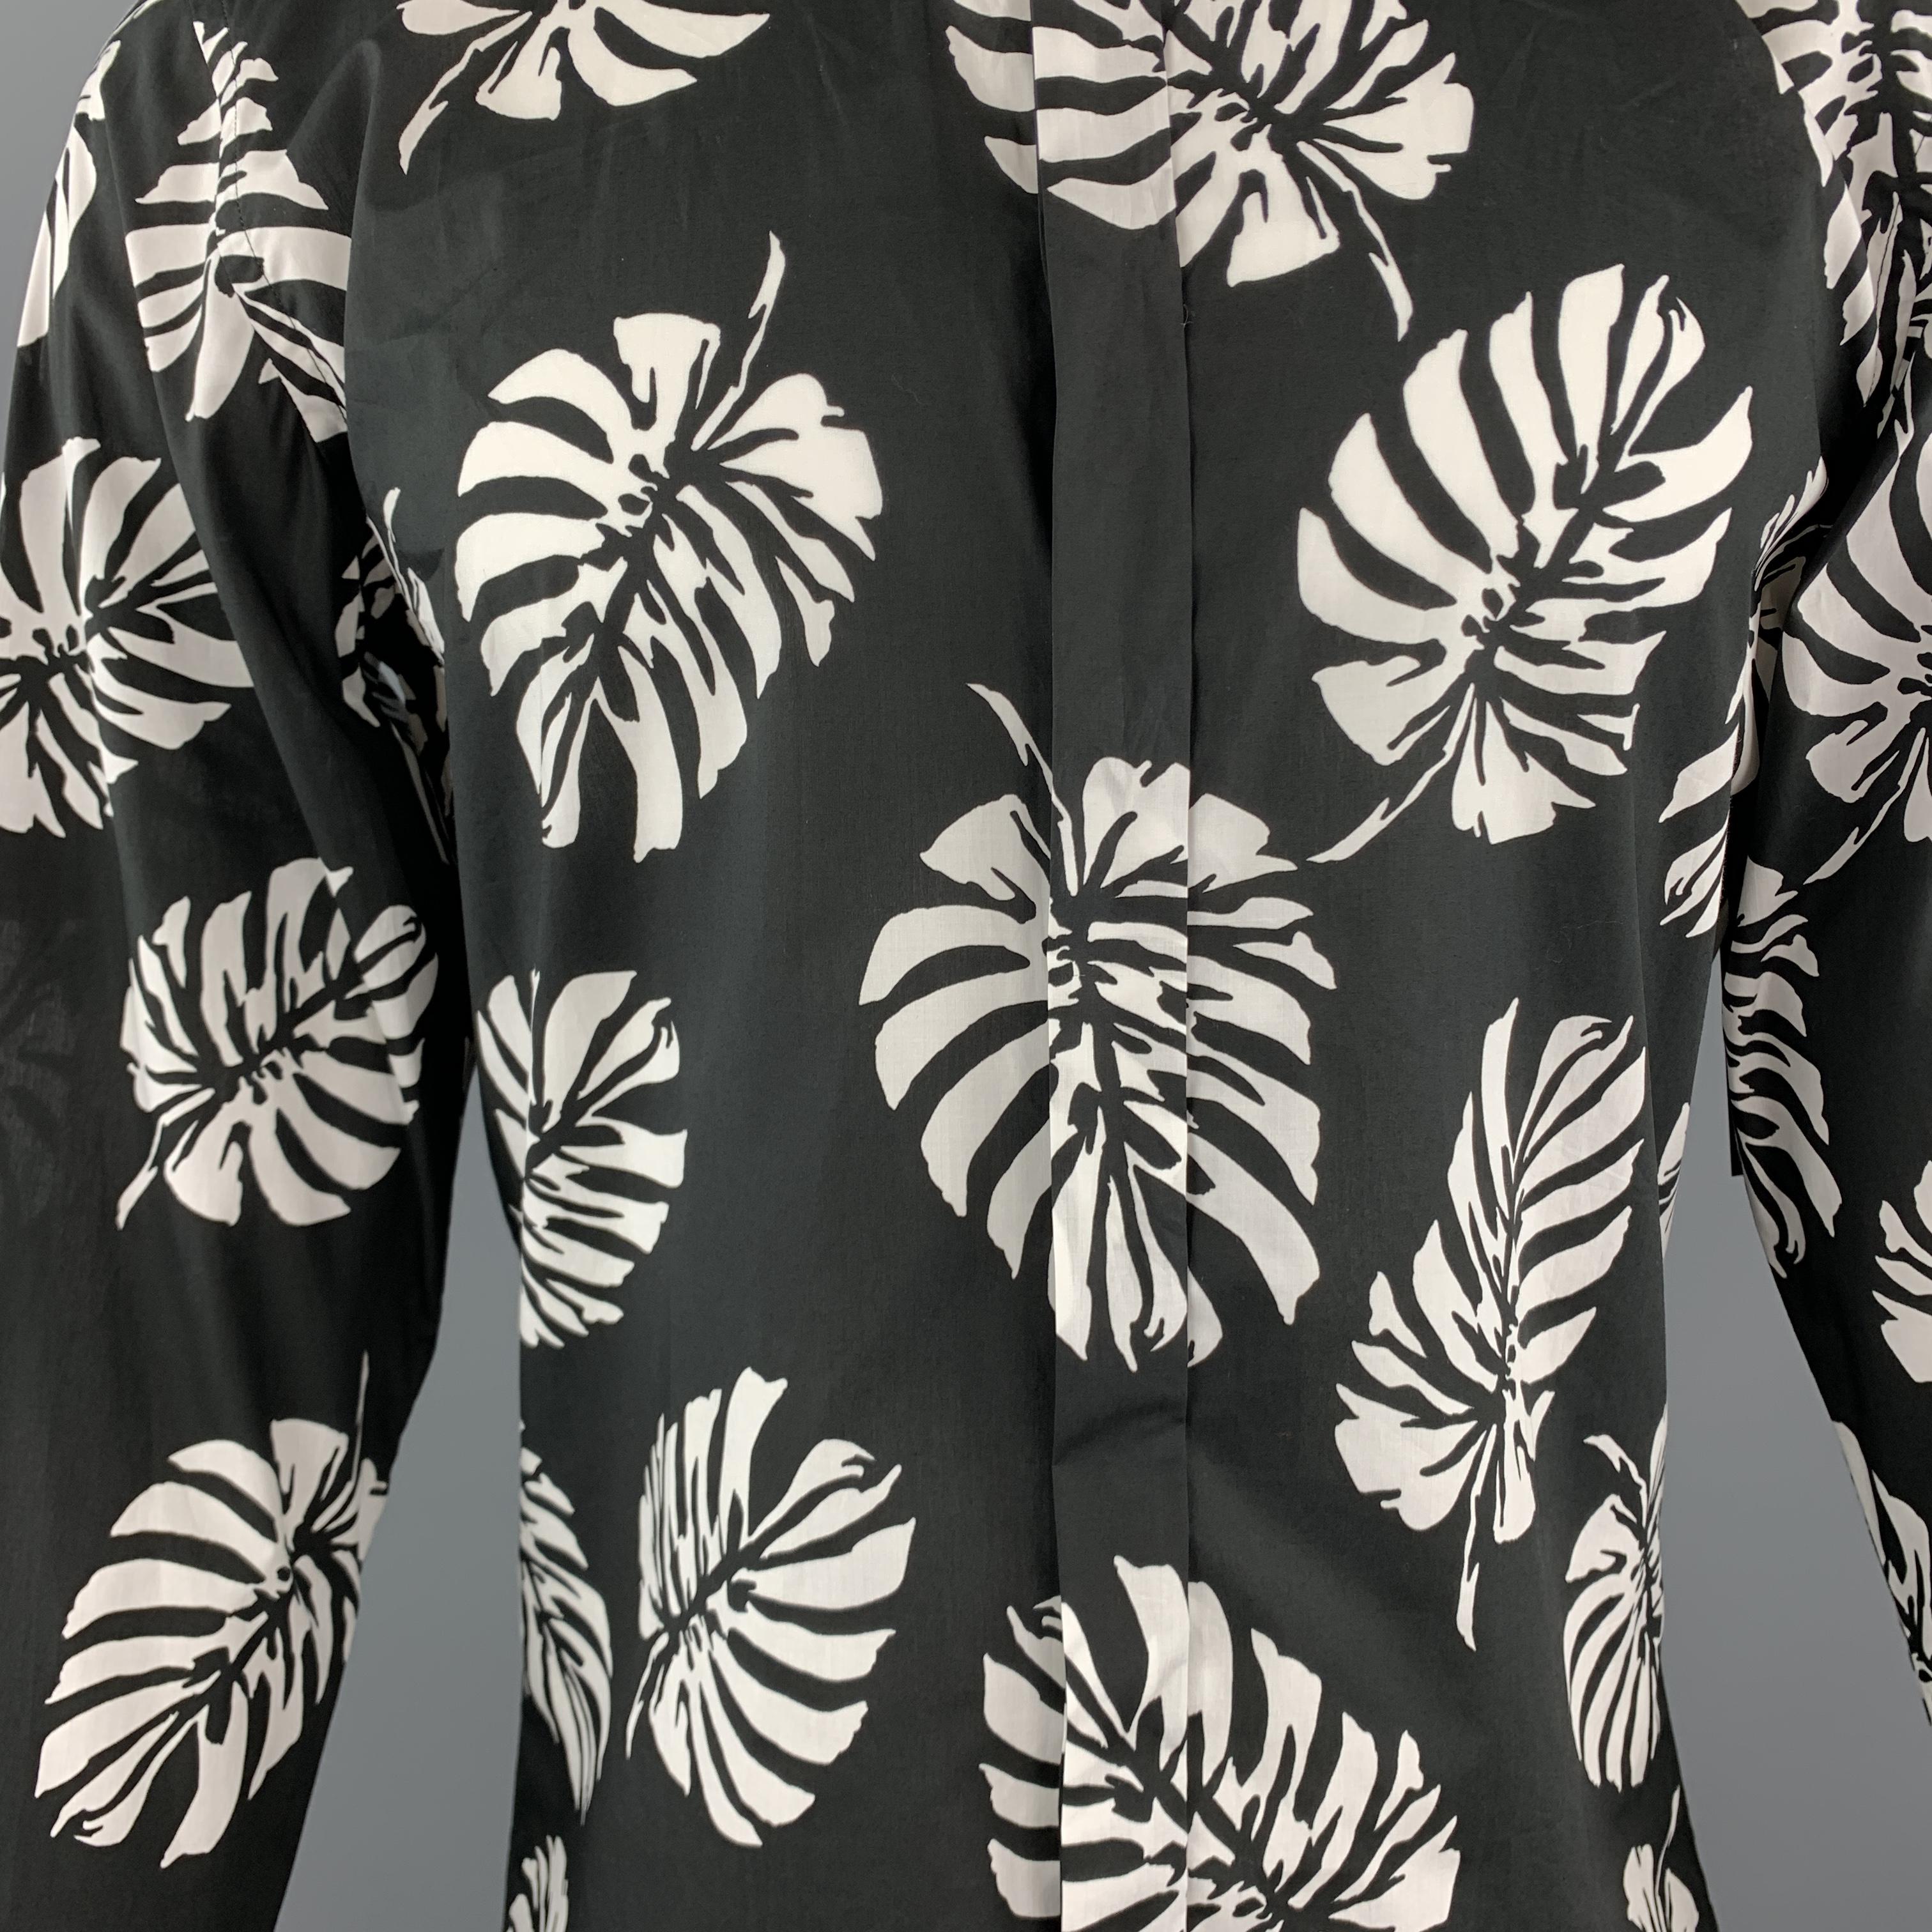 DOLCE & GABBANA shirt comes in black and white palm leaf print cotton with a pointed collar and hidden placket. Made in Italy.

New with Tags. 
Marked: 15 3/4  40

Measurements:

Shoulder: 16 in.
Chest: 42 in.
Sleeve: 27 in.
Length: 31.5 in.